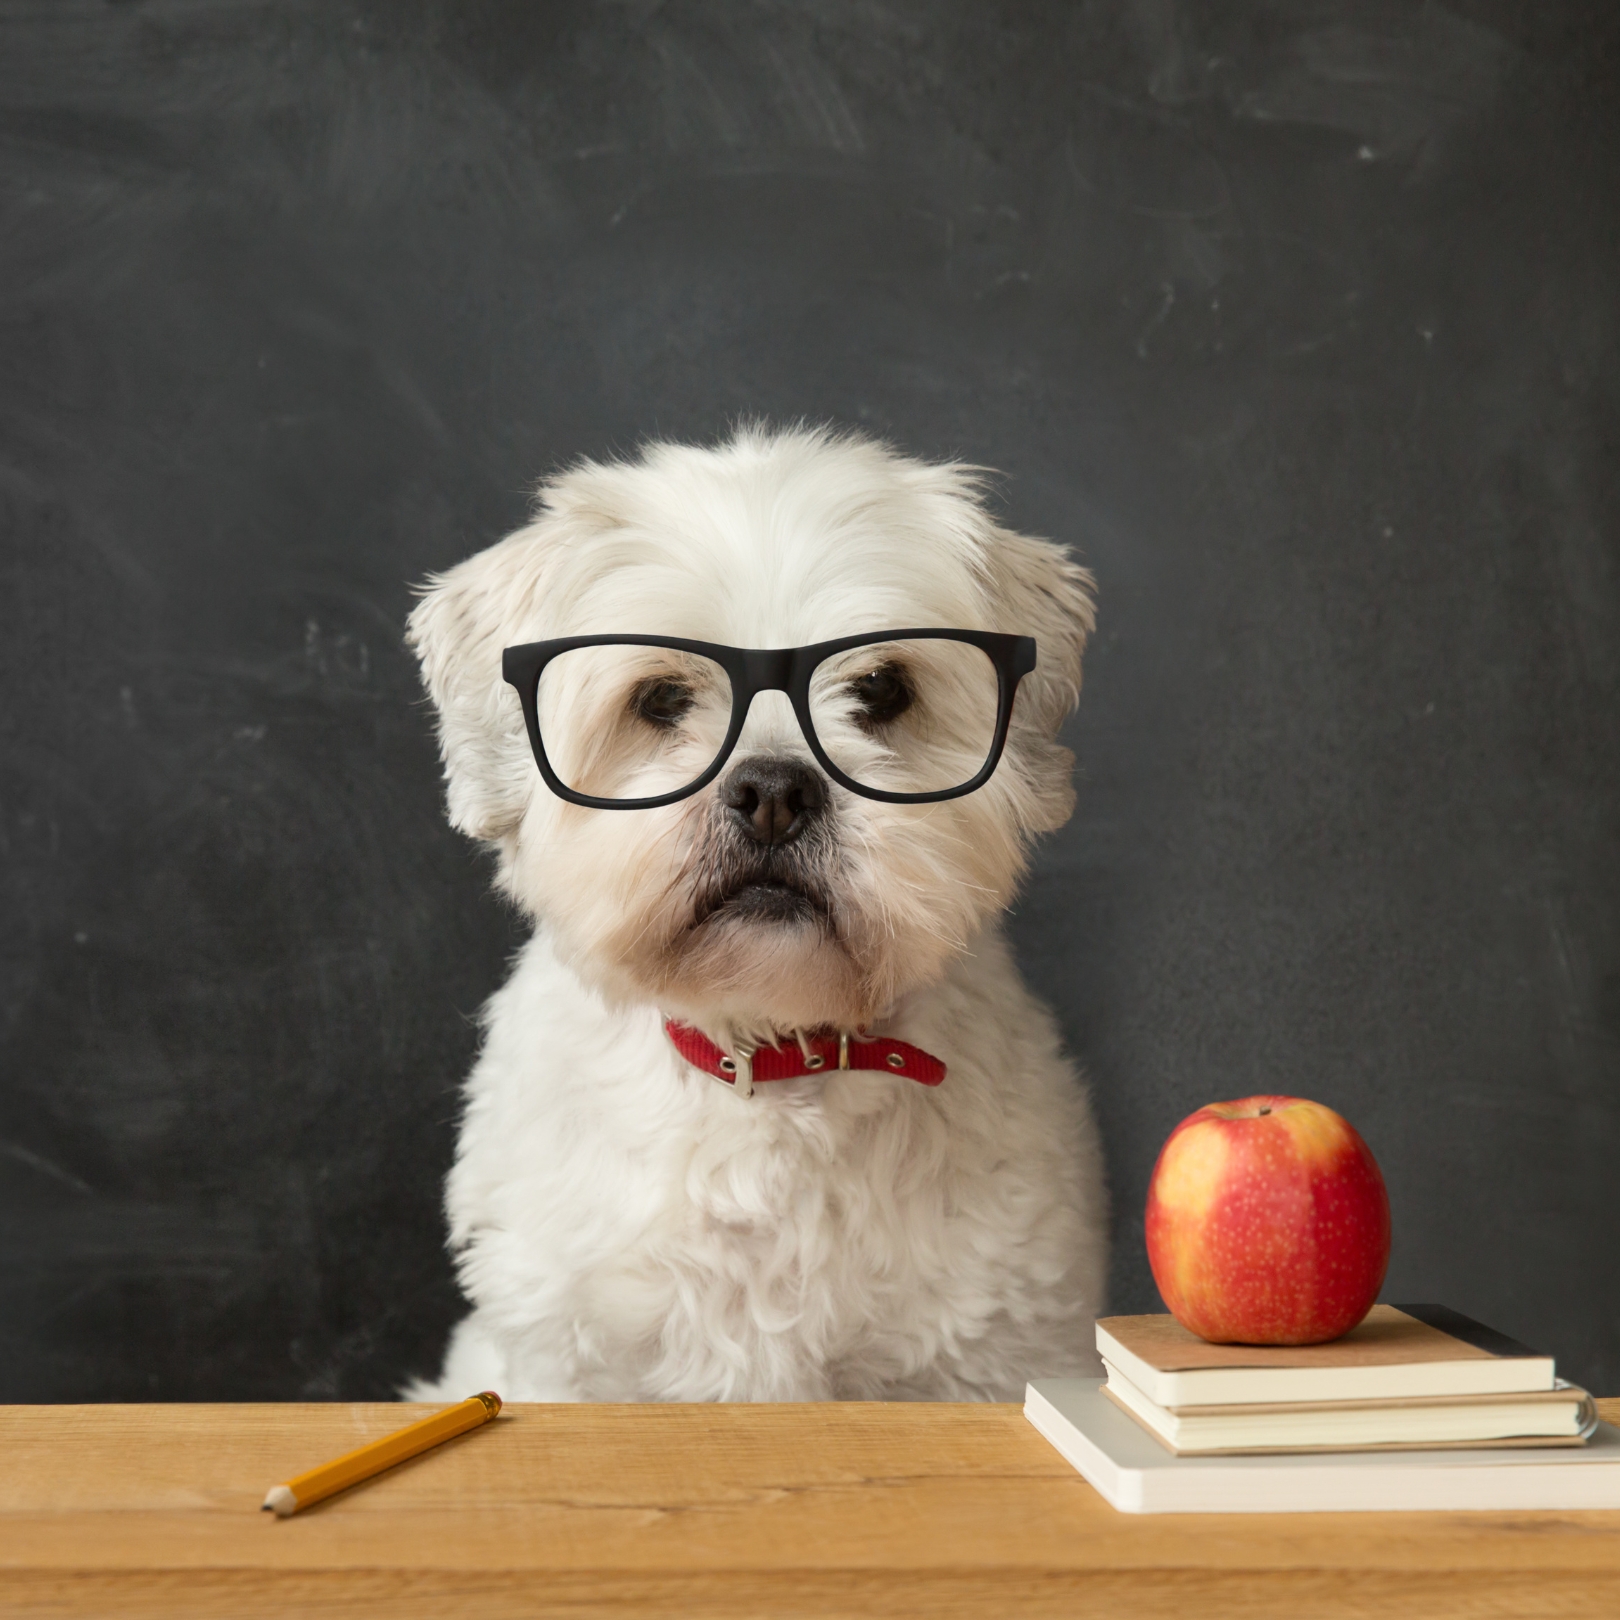 It is time to go back to school, it is time for a new routine for your pet